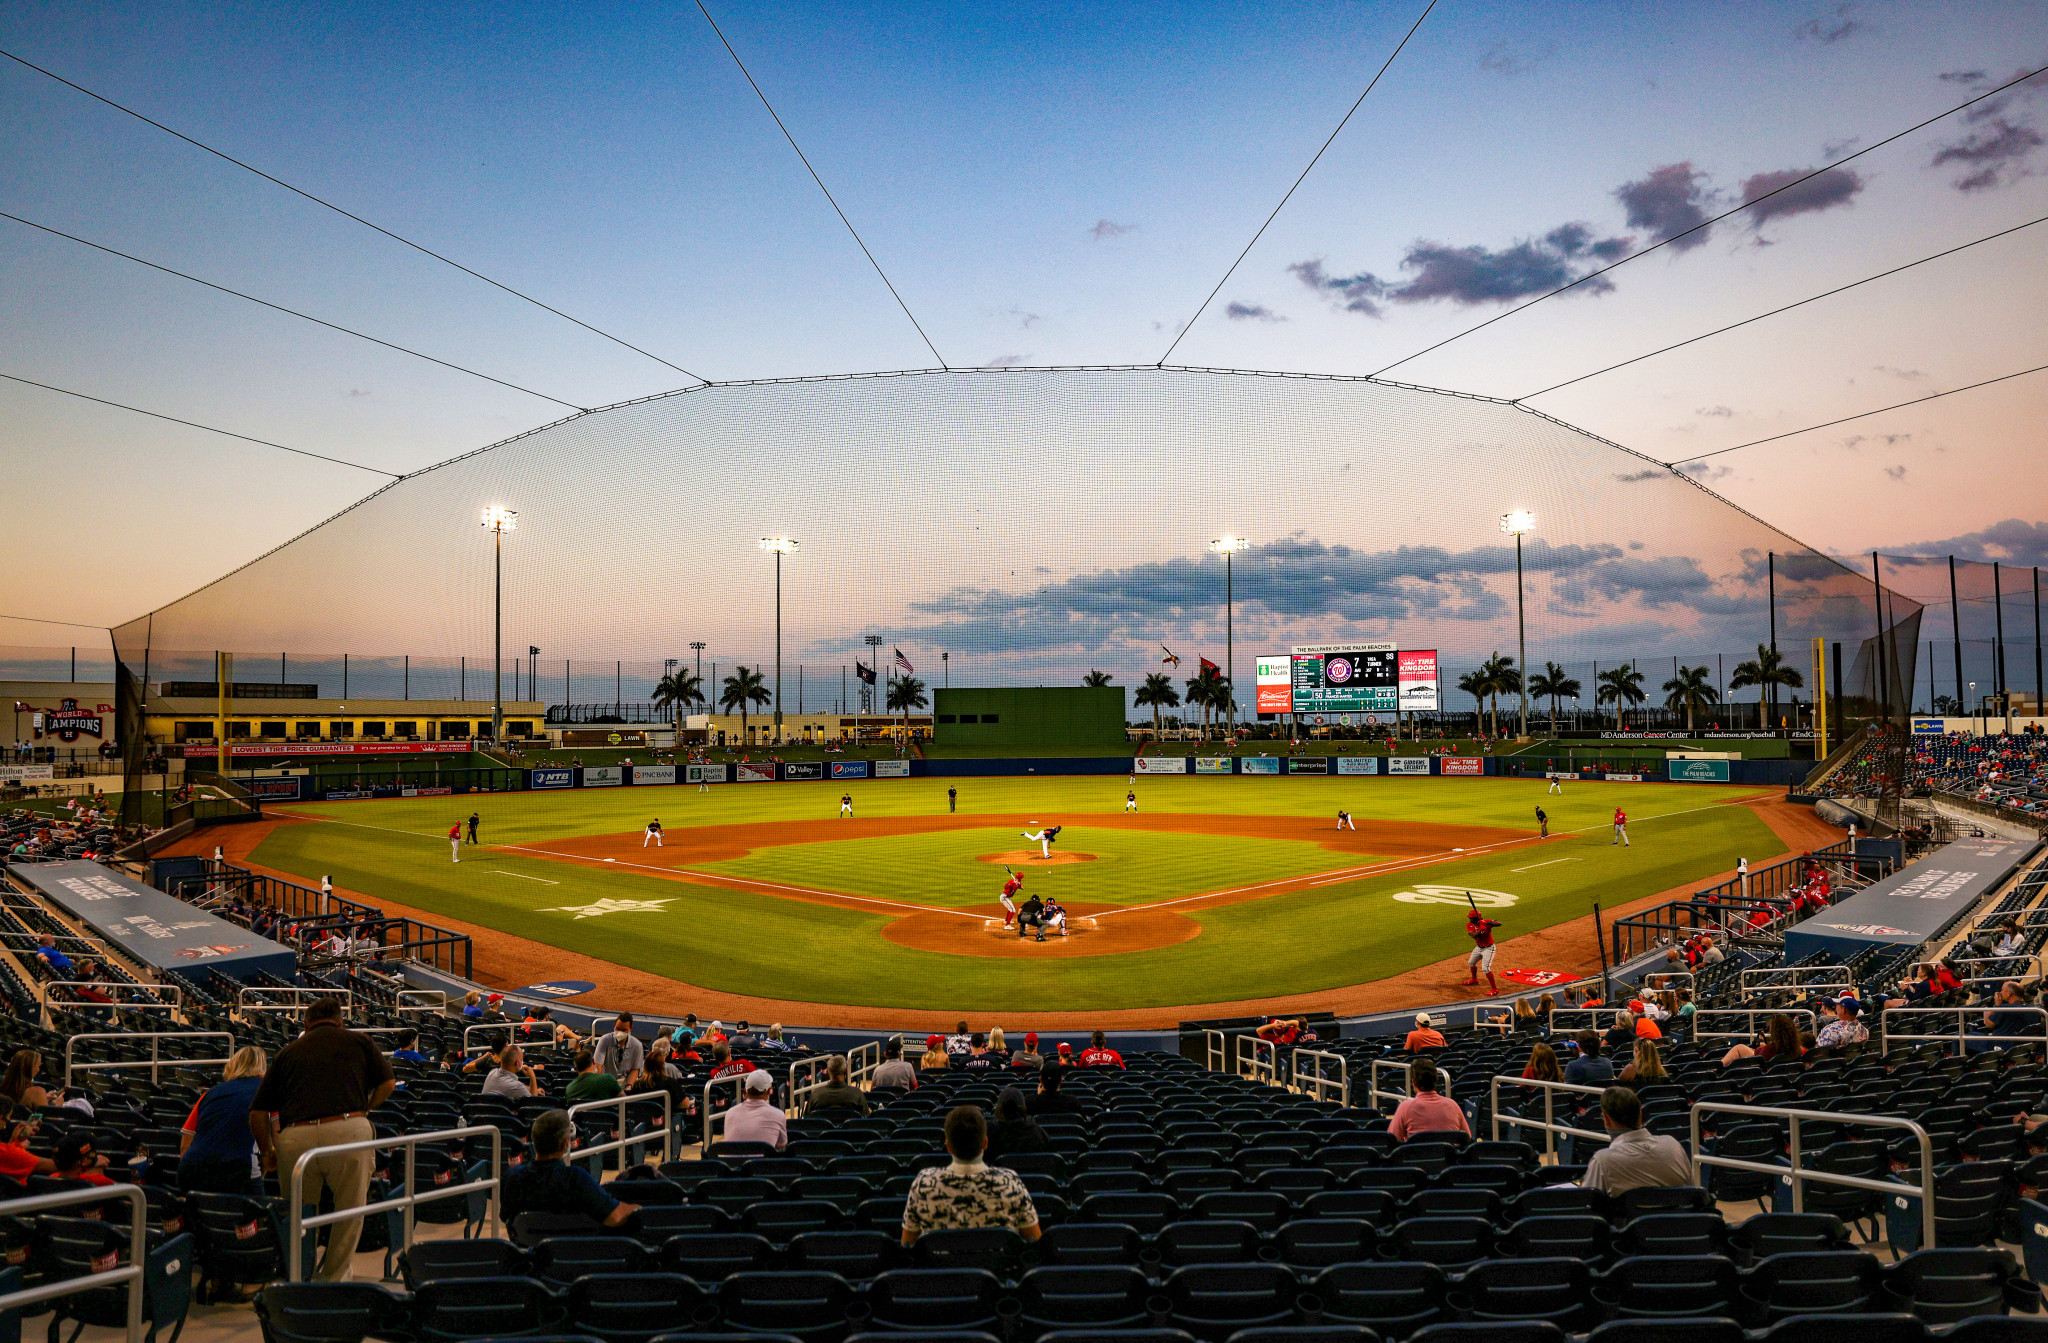 The Ballpark of the Palm Beaches will stage games in the Americas qualifier for the Olympic baseball tournament ©Getty Images